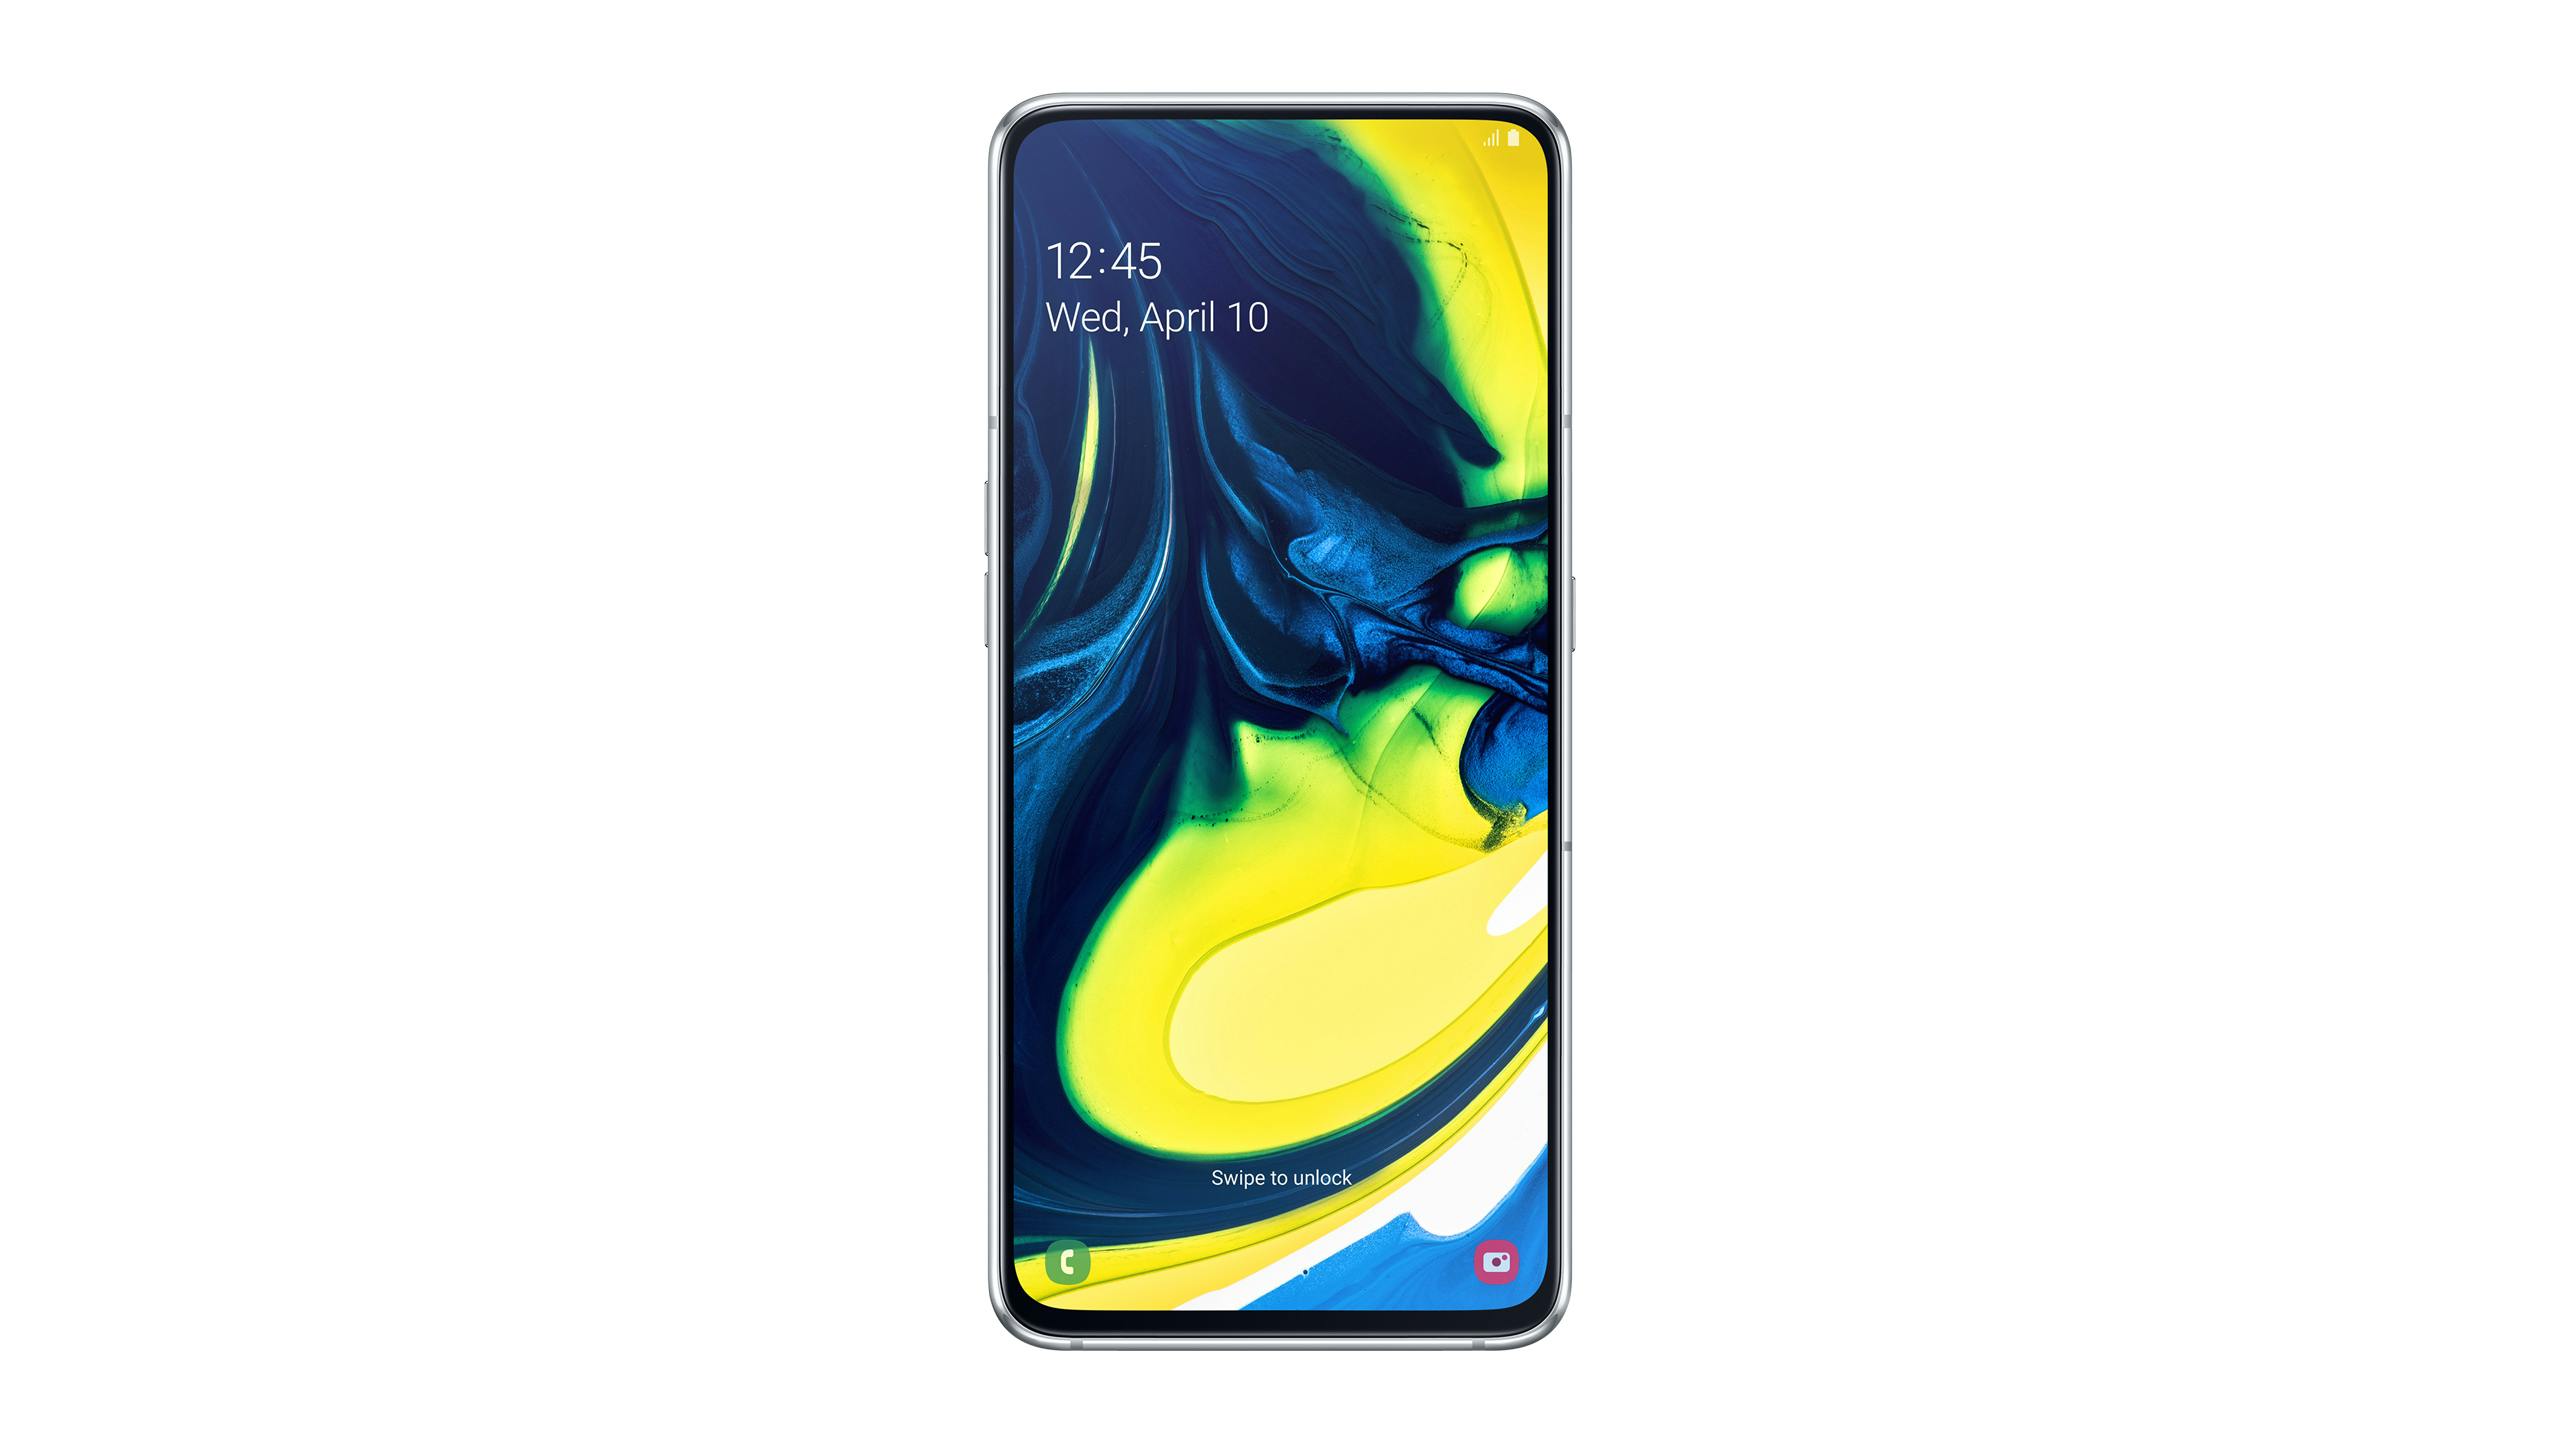 The Samsung Galaxy A80 is available in one storage variant of 8 GB RAM and 128 GB internal storage.